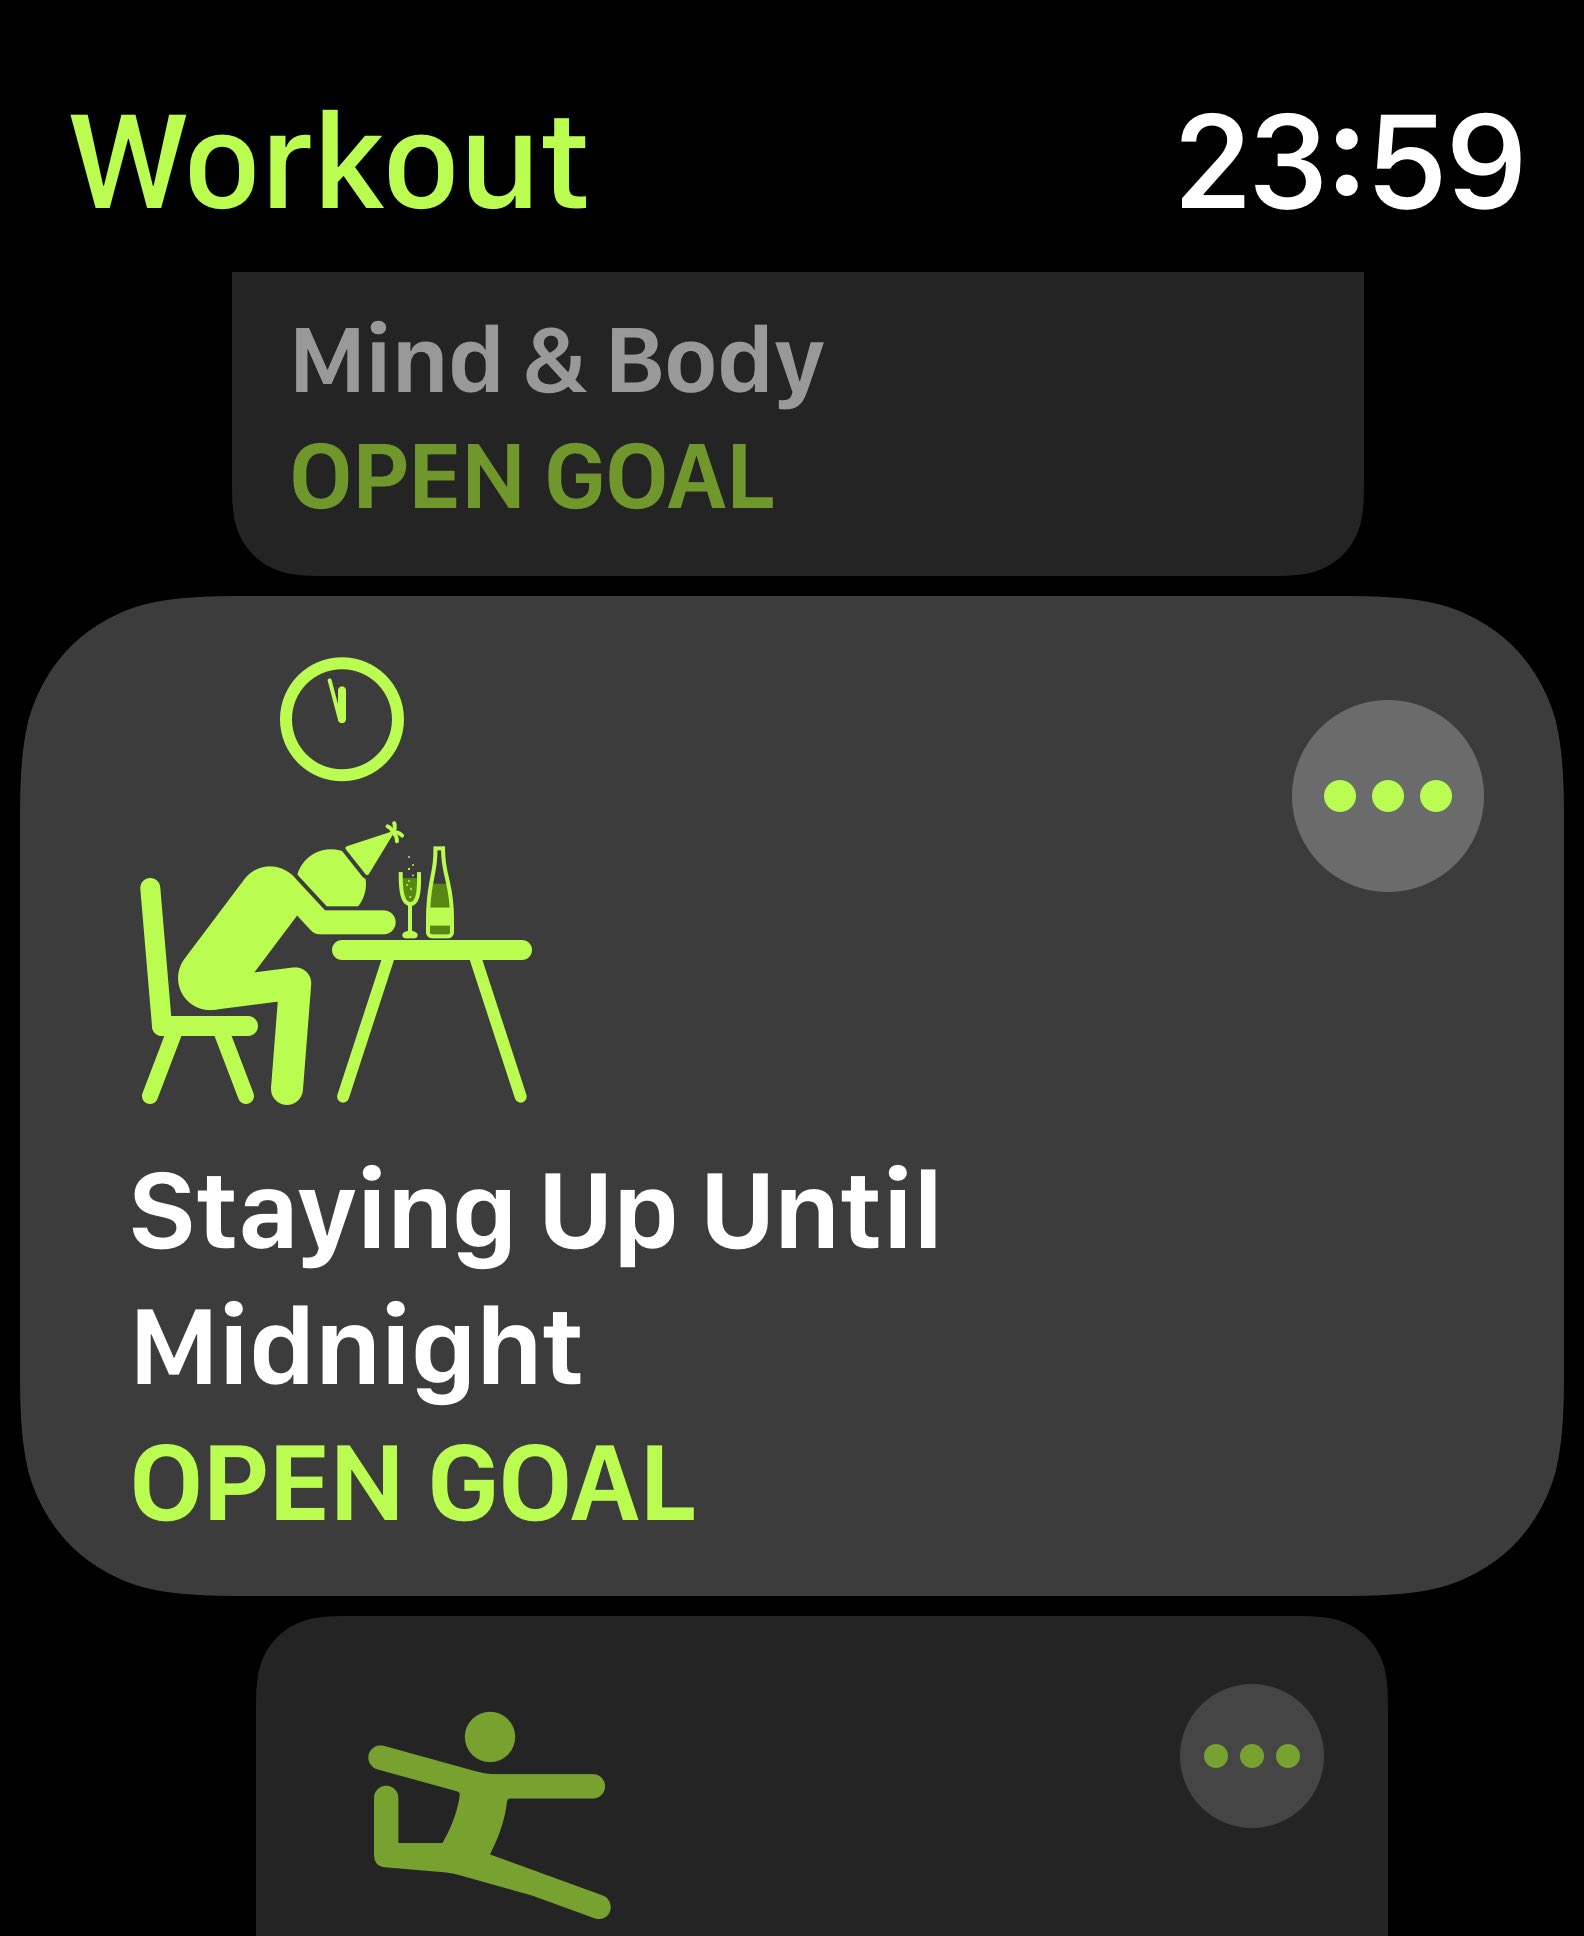 Basic Apple Guy on X: "Lesser known Apple Watch Workouts: Staying Up Until  Midnight 🥳 https://t.co/N1v21ev3fk" / X